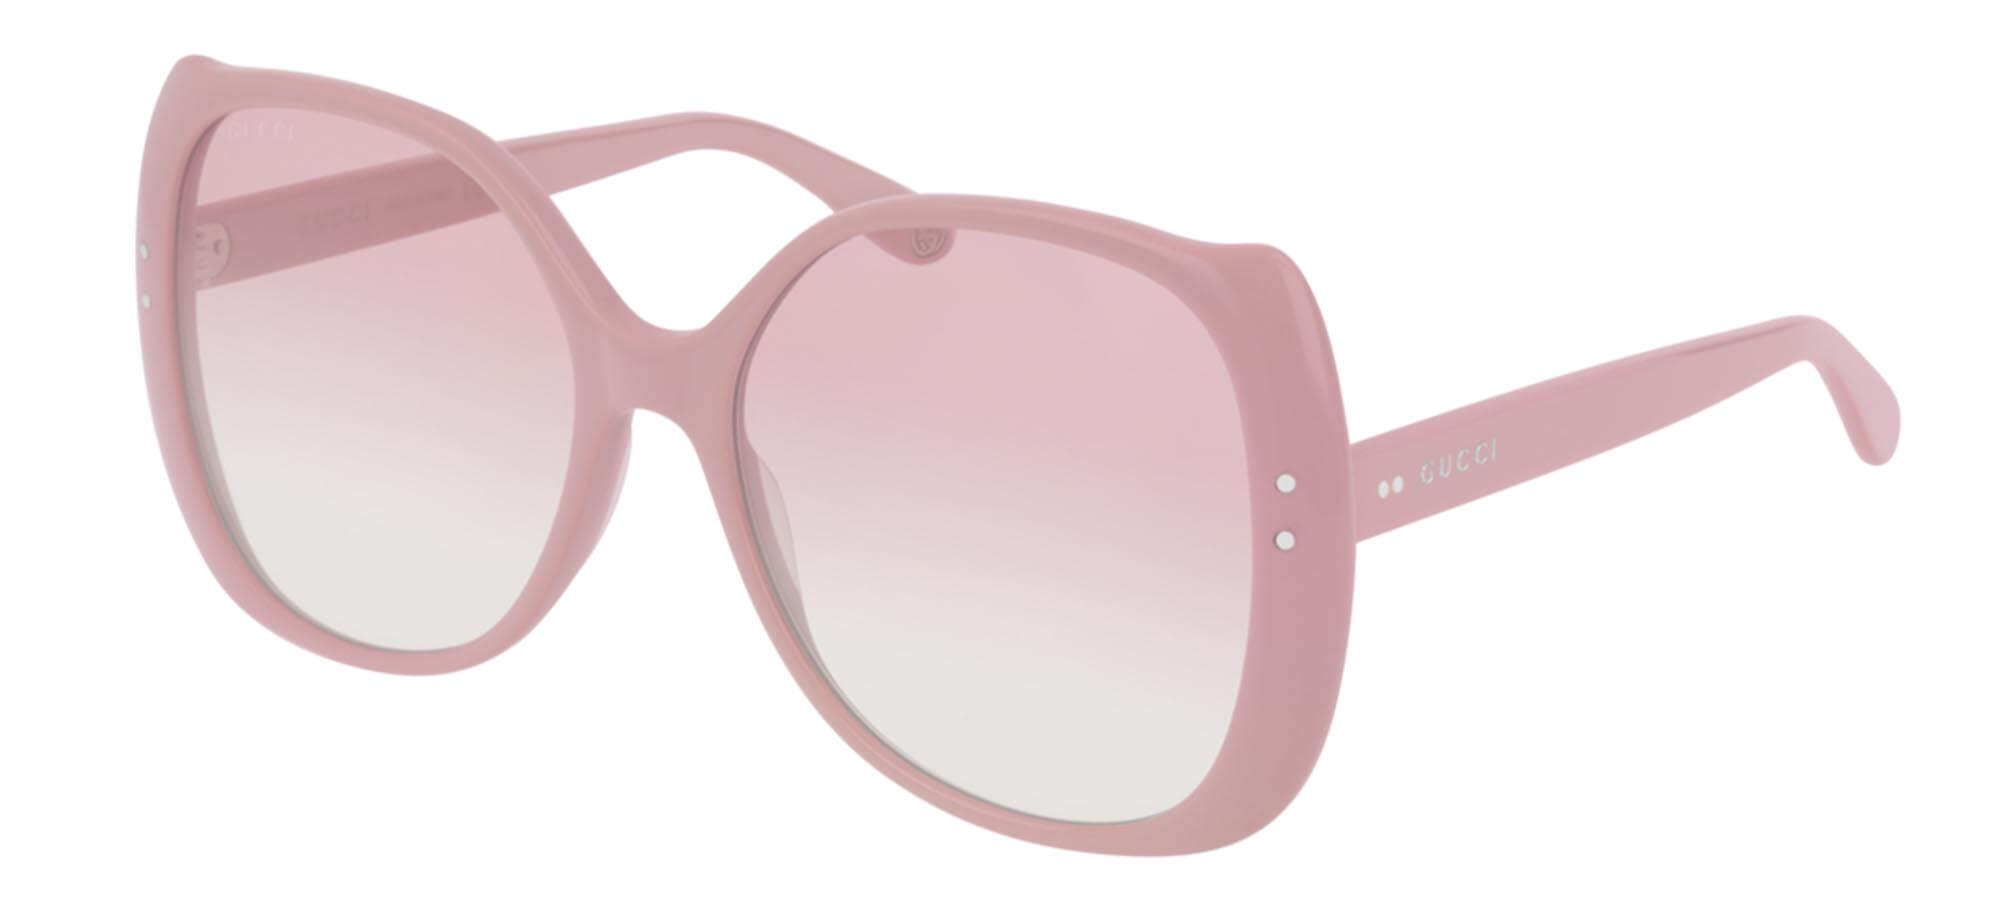 GucciGG0472SPink/pink Shaded (004 RR)